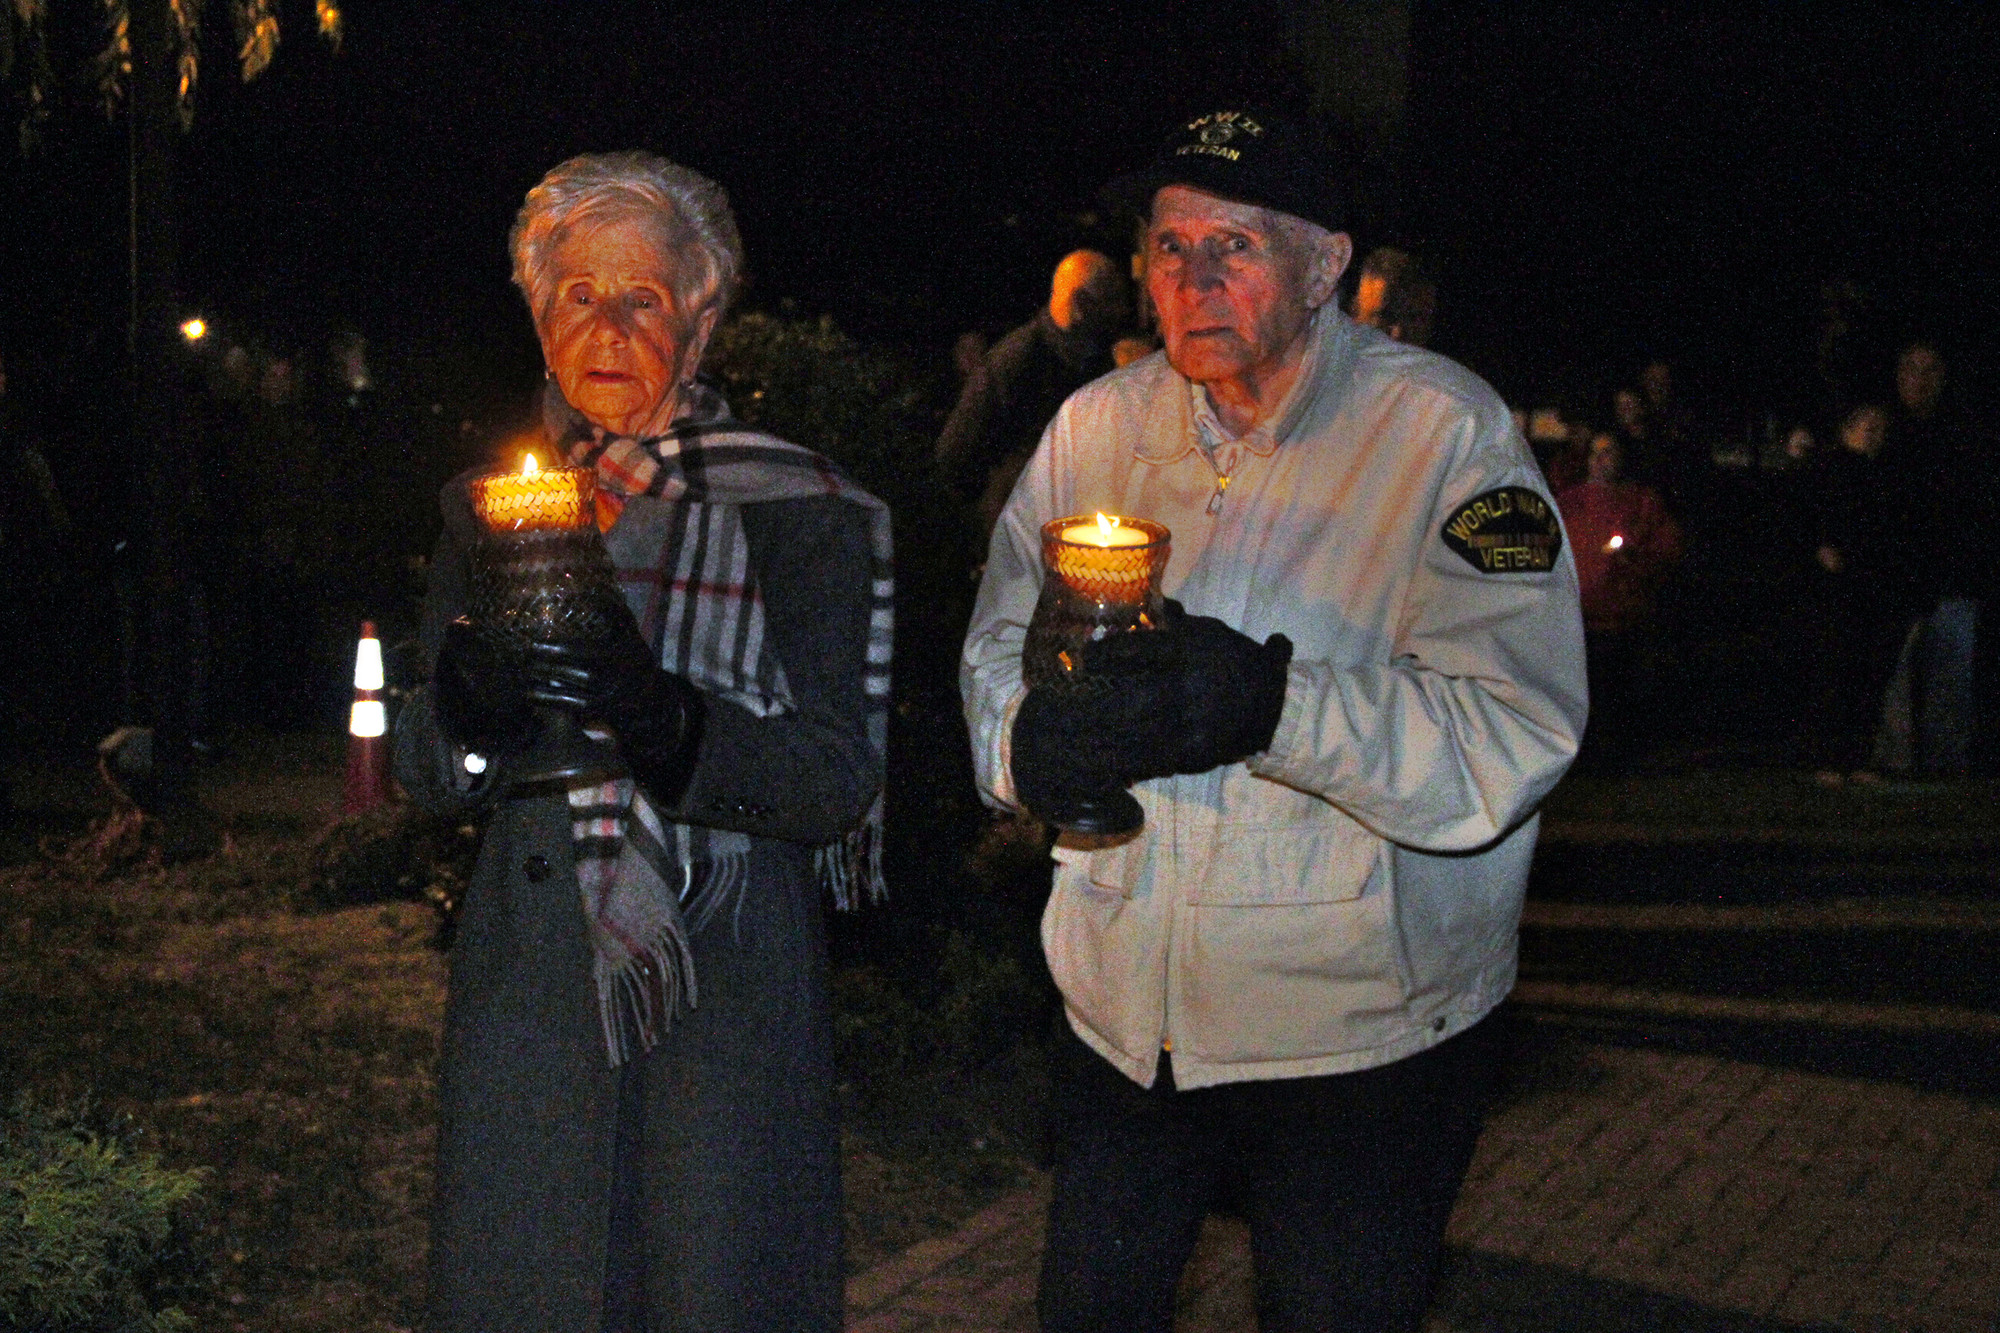 Mary Ann and Frank Sherry placed candles on the village’s memorial in honor of their son, John Anthony, who died in the attacks.